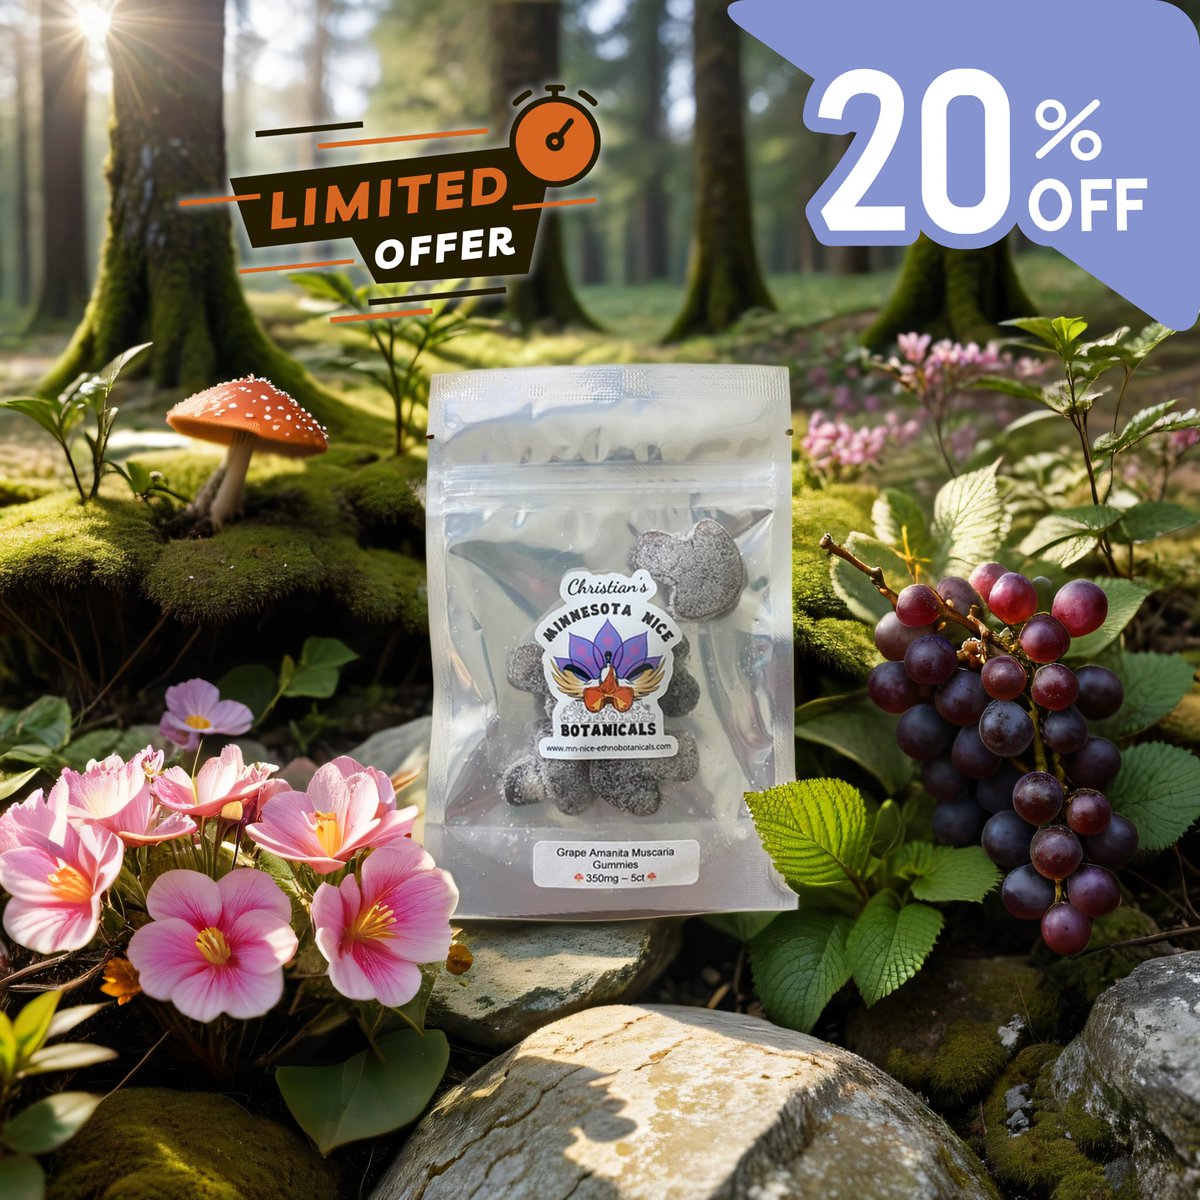 🍇 Get 20% off grape flavored Amanita Muscaria gummies this weekend only with code 'grape20'. Don't miss out on this juicy deal! 🌟 Link in bio! 

#MinnesotaNiceEthnobotanicals #Amanita #AmanitaMuscaria #AmanitaMuscariaGummies #plantmedicine #psychedelicrenaissance